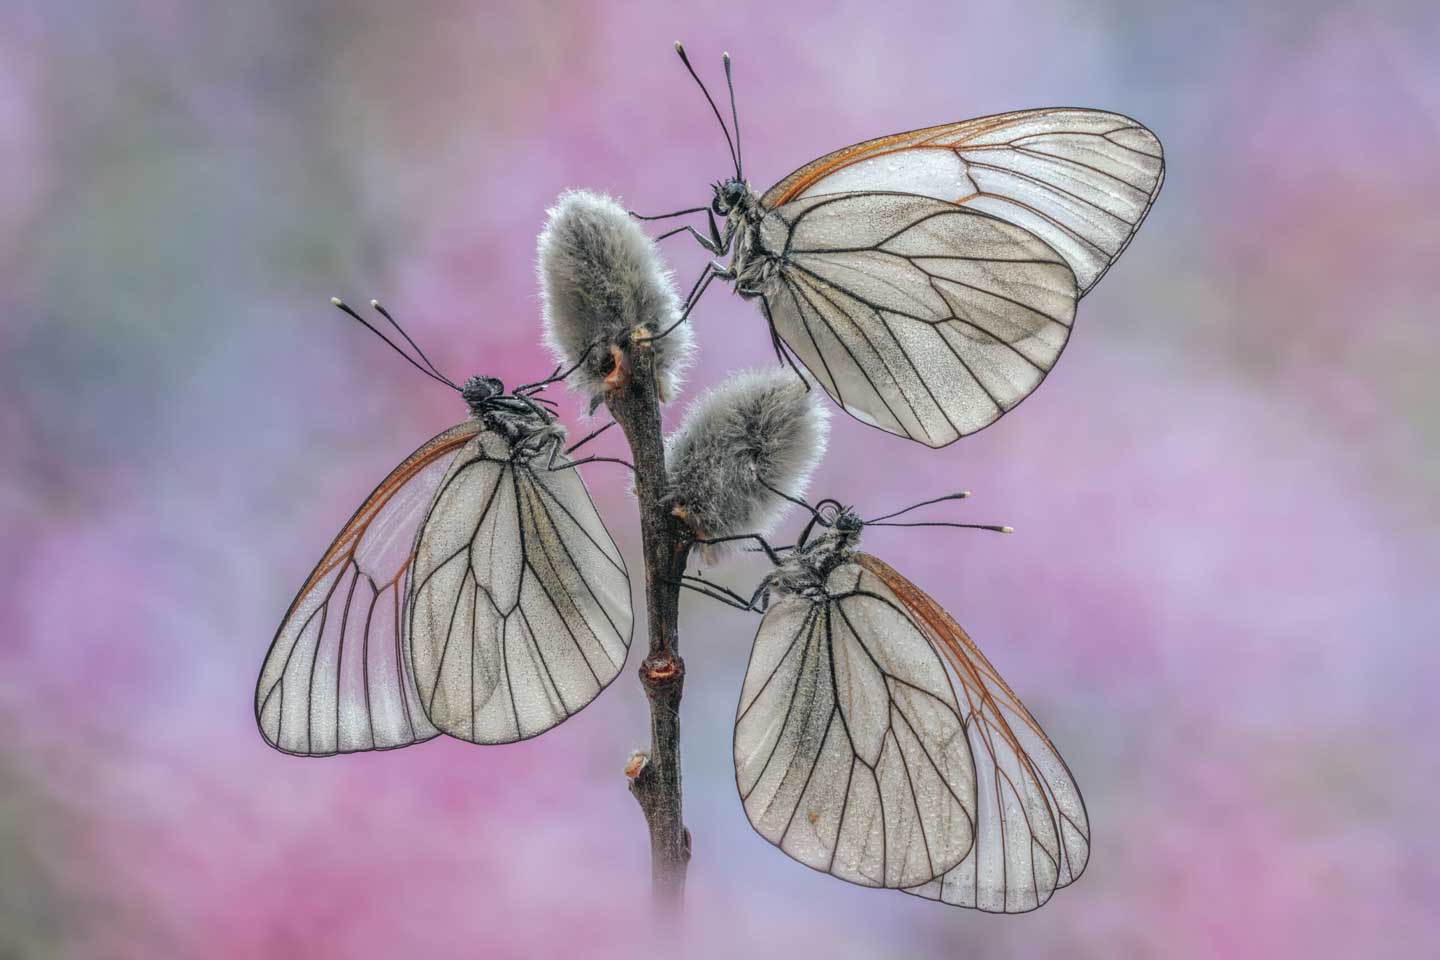 CJPOTY February shortlisted image - three butterflies